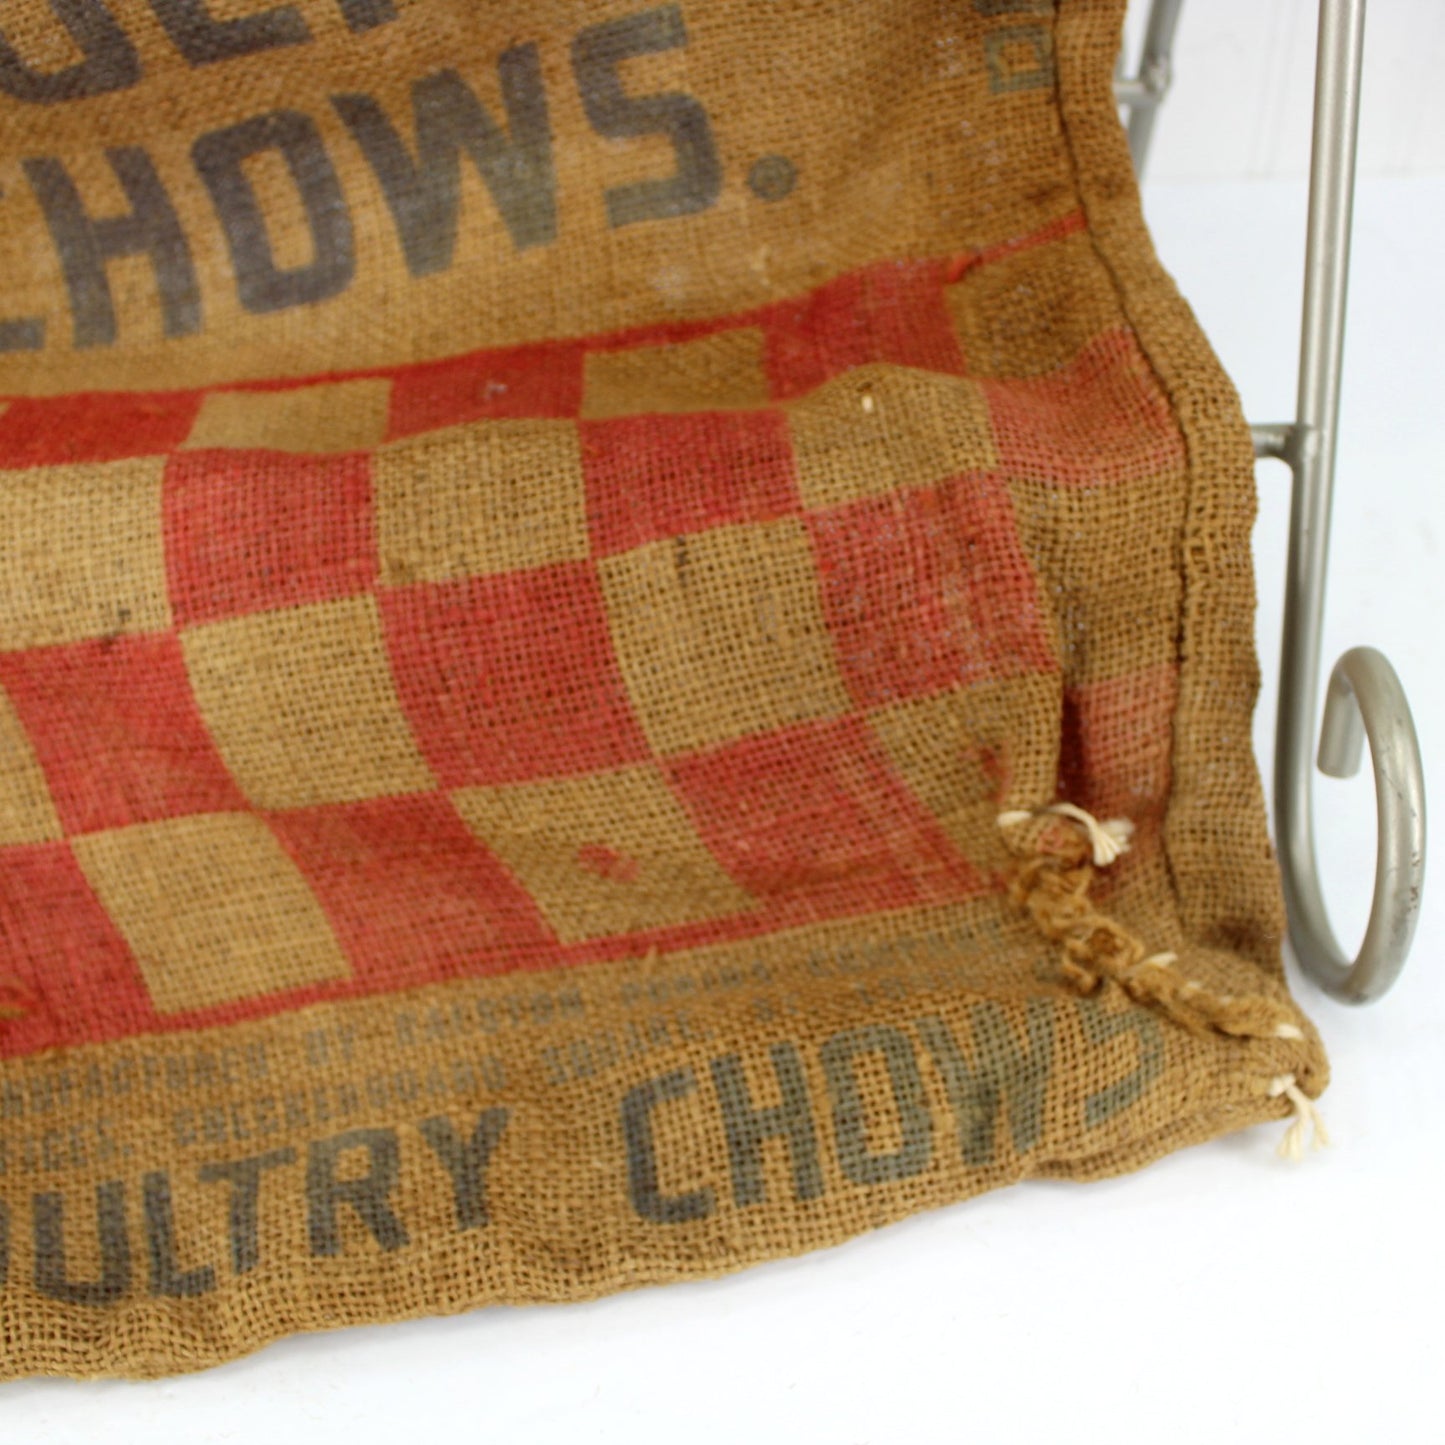 Purina Vintage Poultry Chows Burlap Feed Bag Sack 50# Size